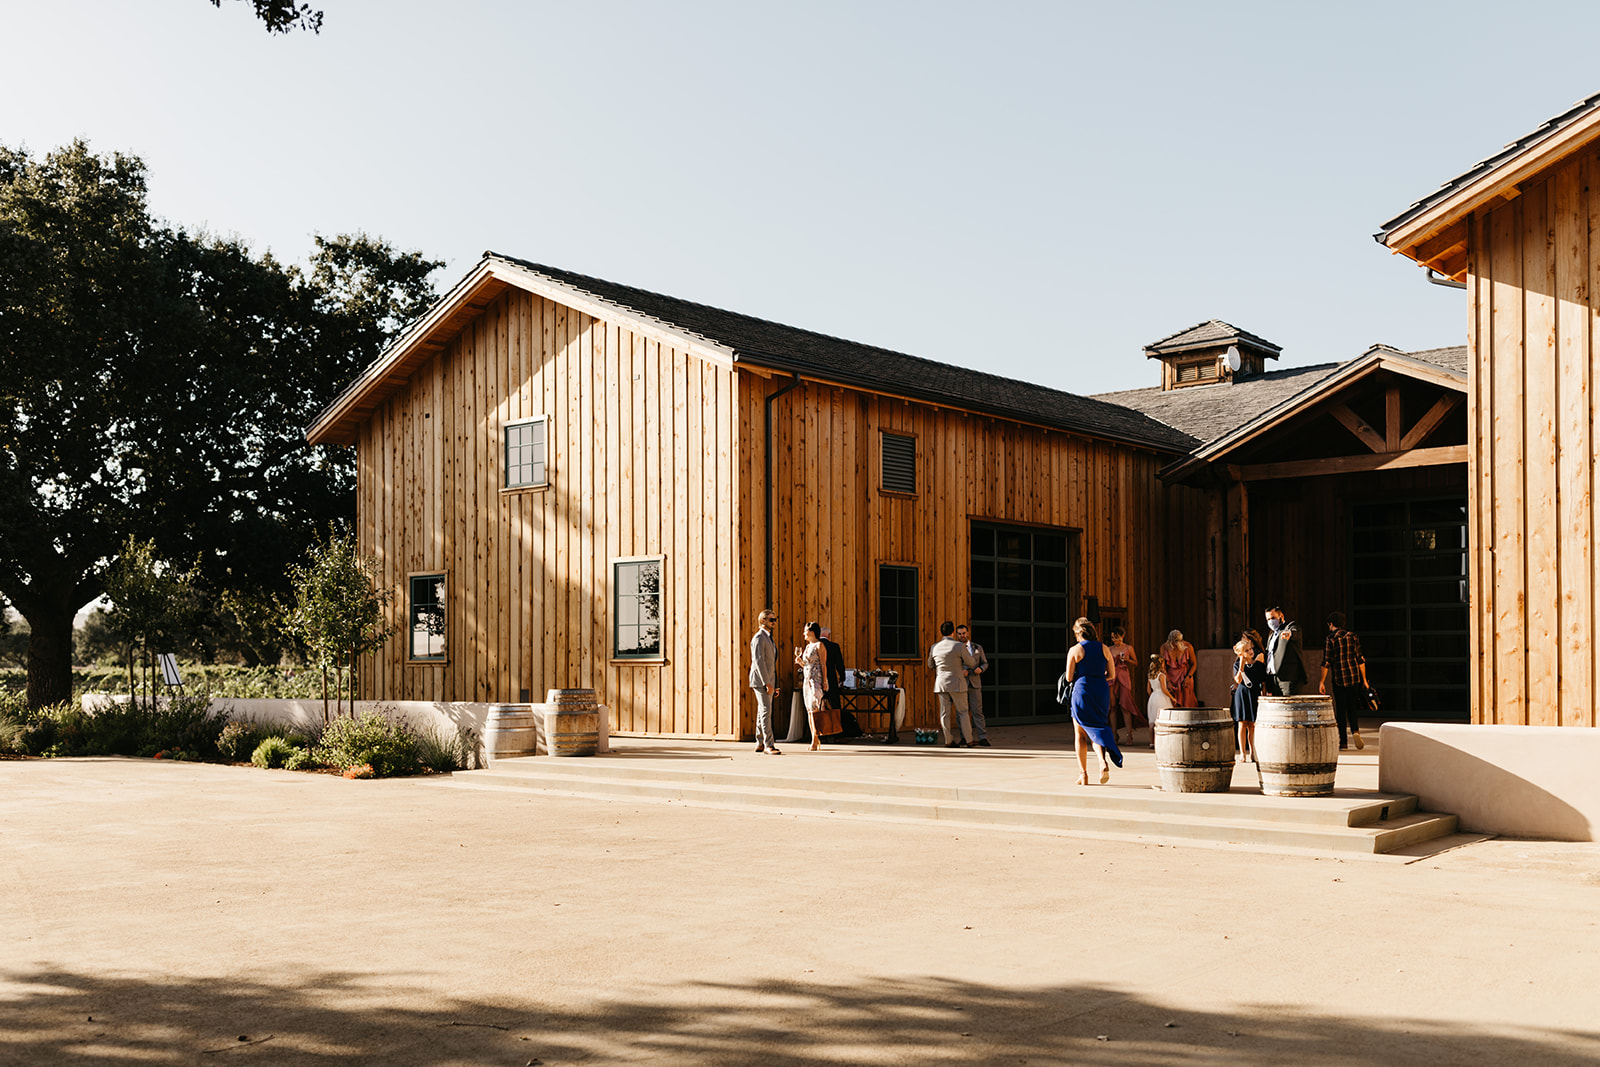 An intimate vineyard wedding at Roblar winery with 20 guests